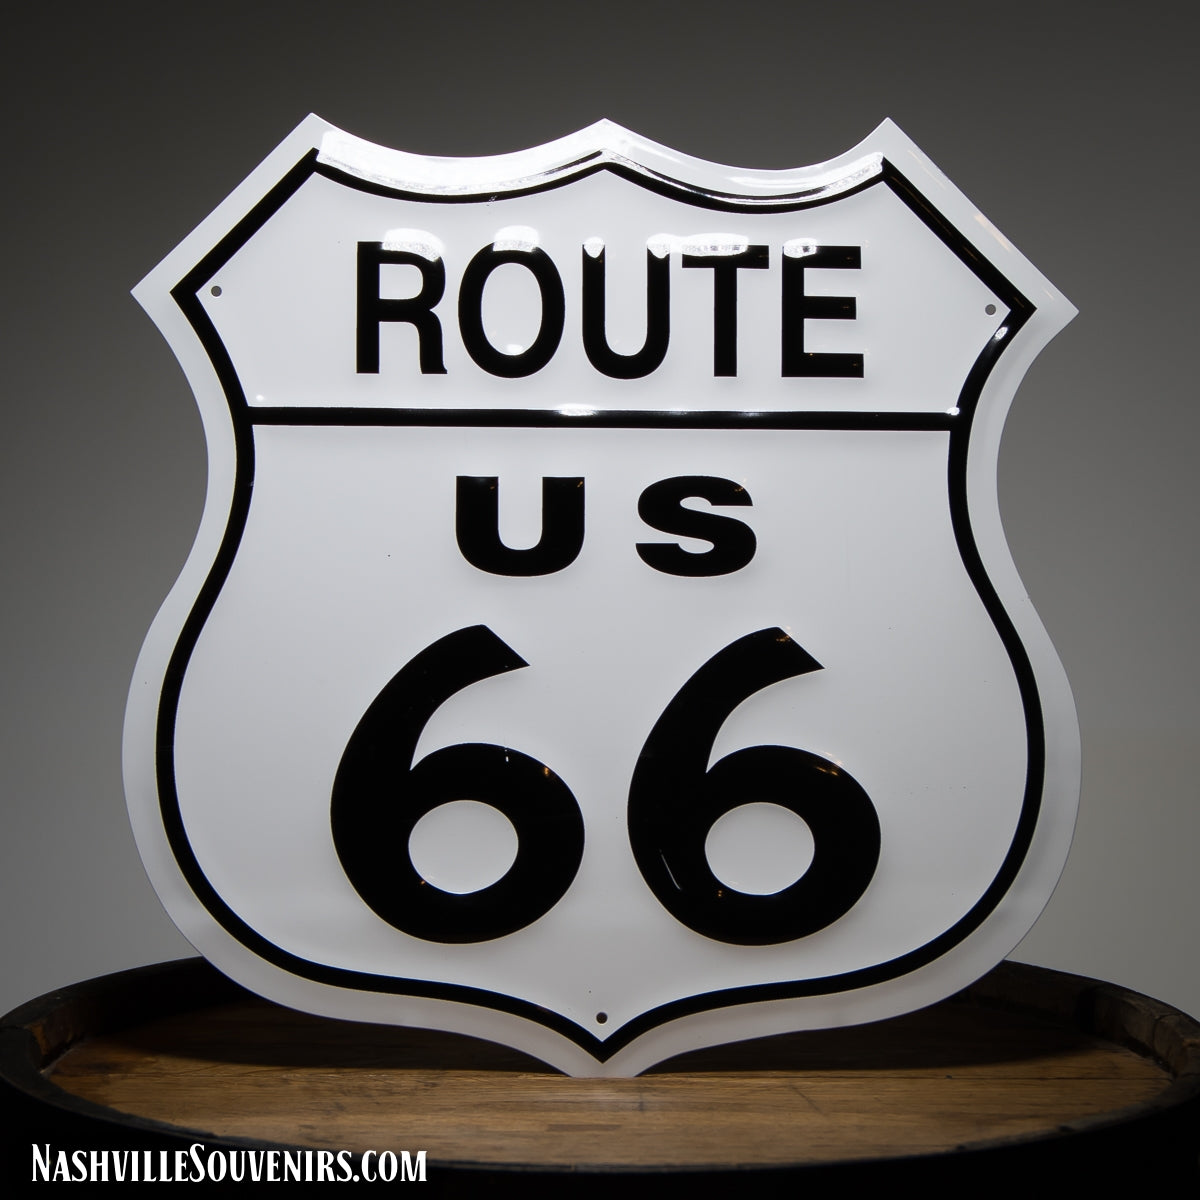 The famous Route US 66 Tin Sign